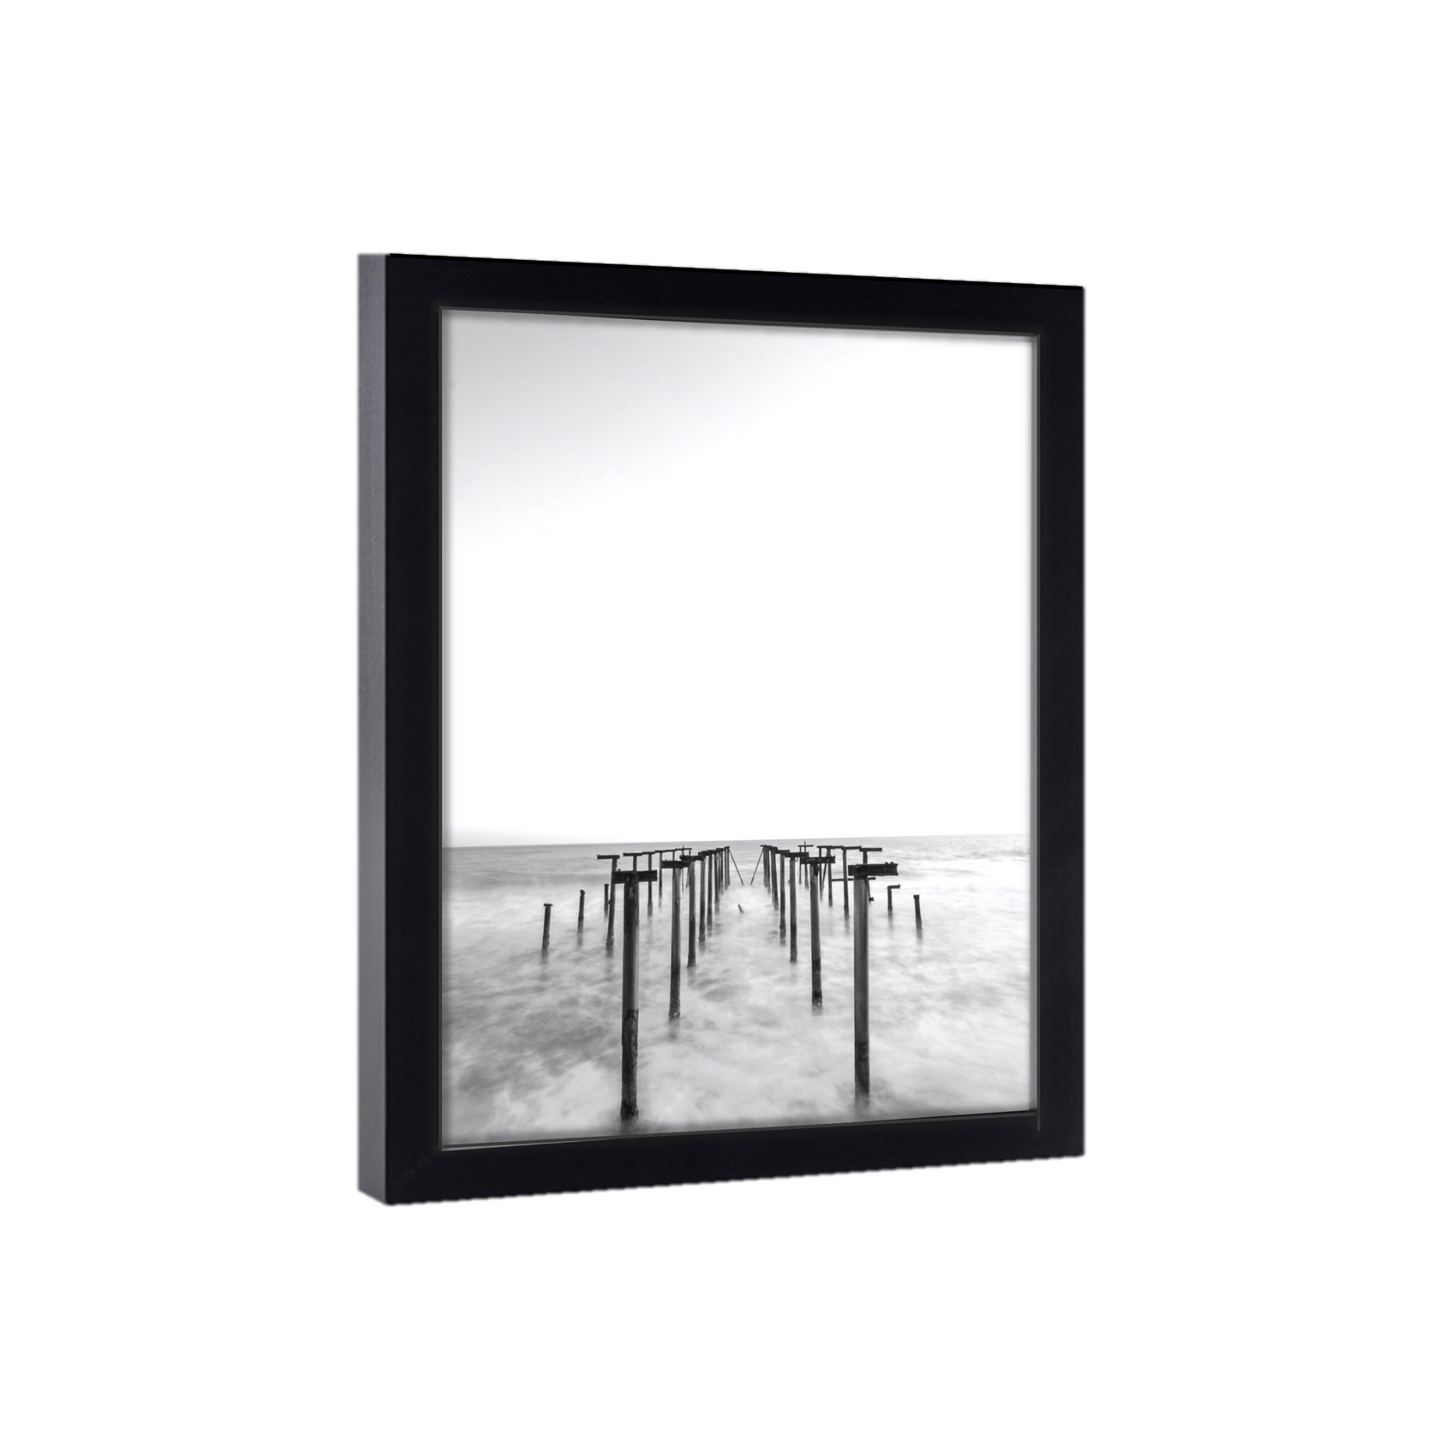 Gallery Wall 35x16 Picture Frame Black Wood 35x16  Poster Size